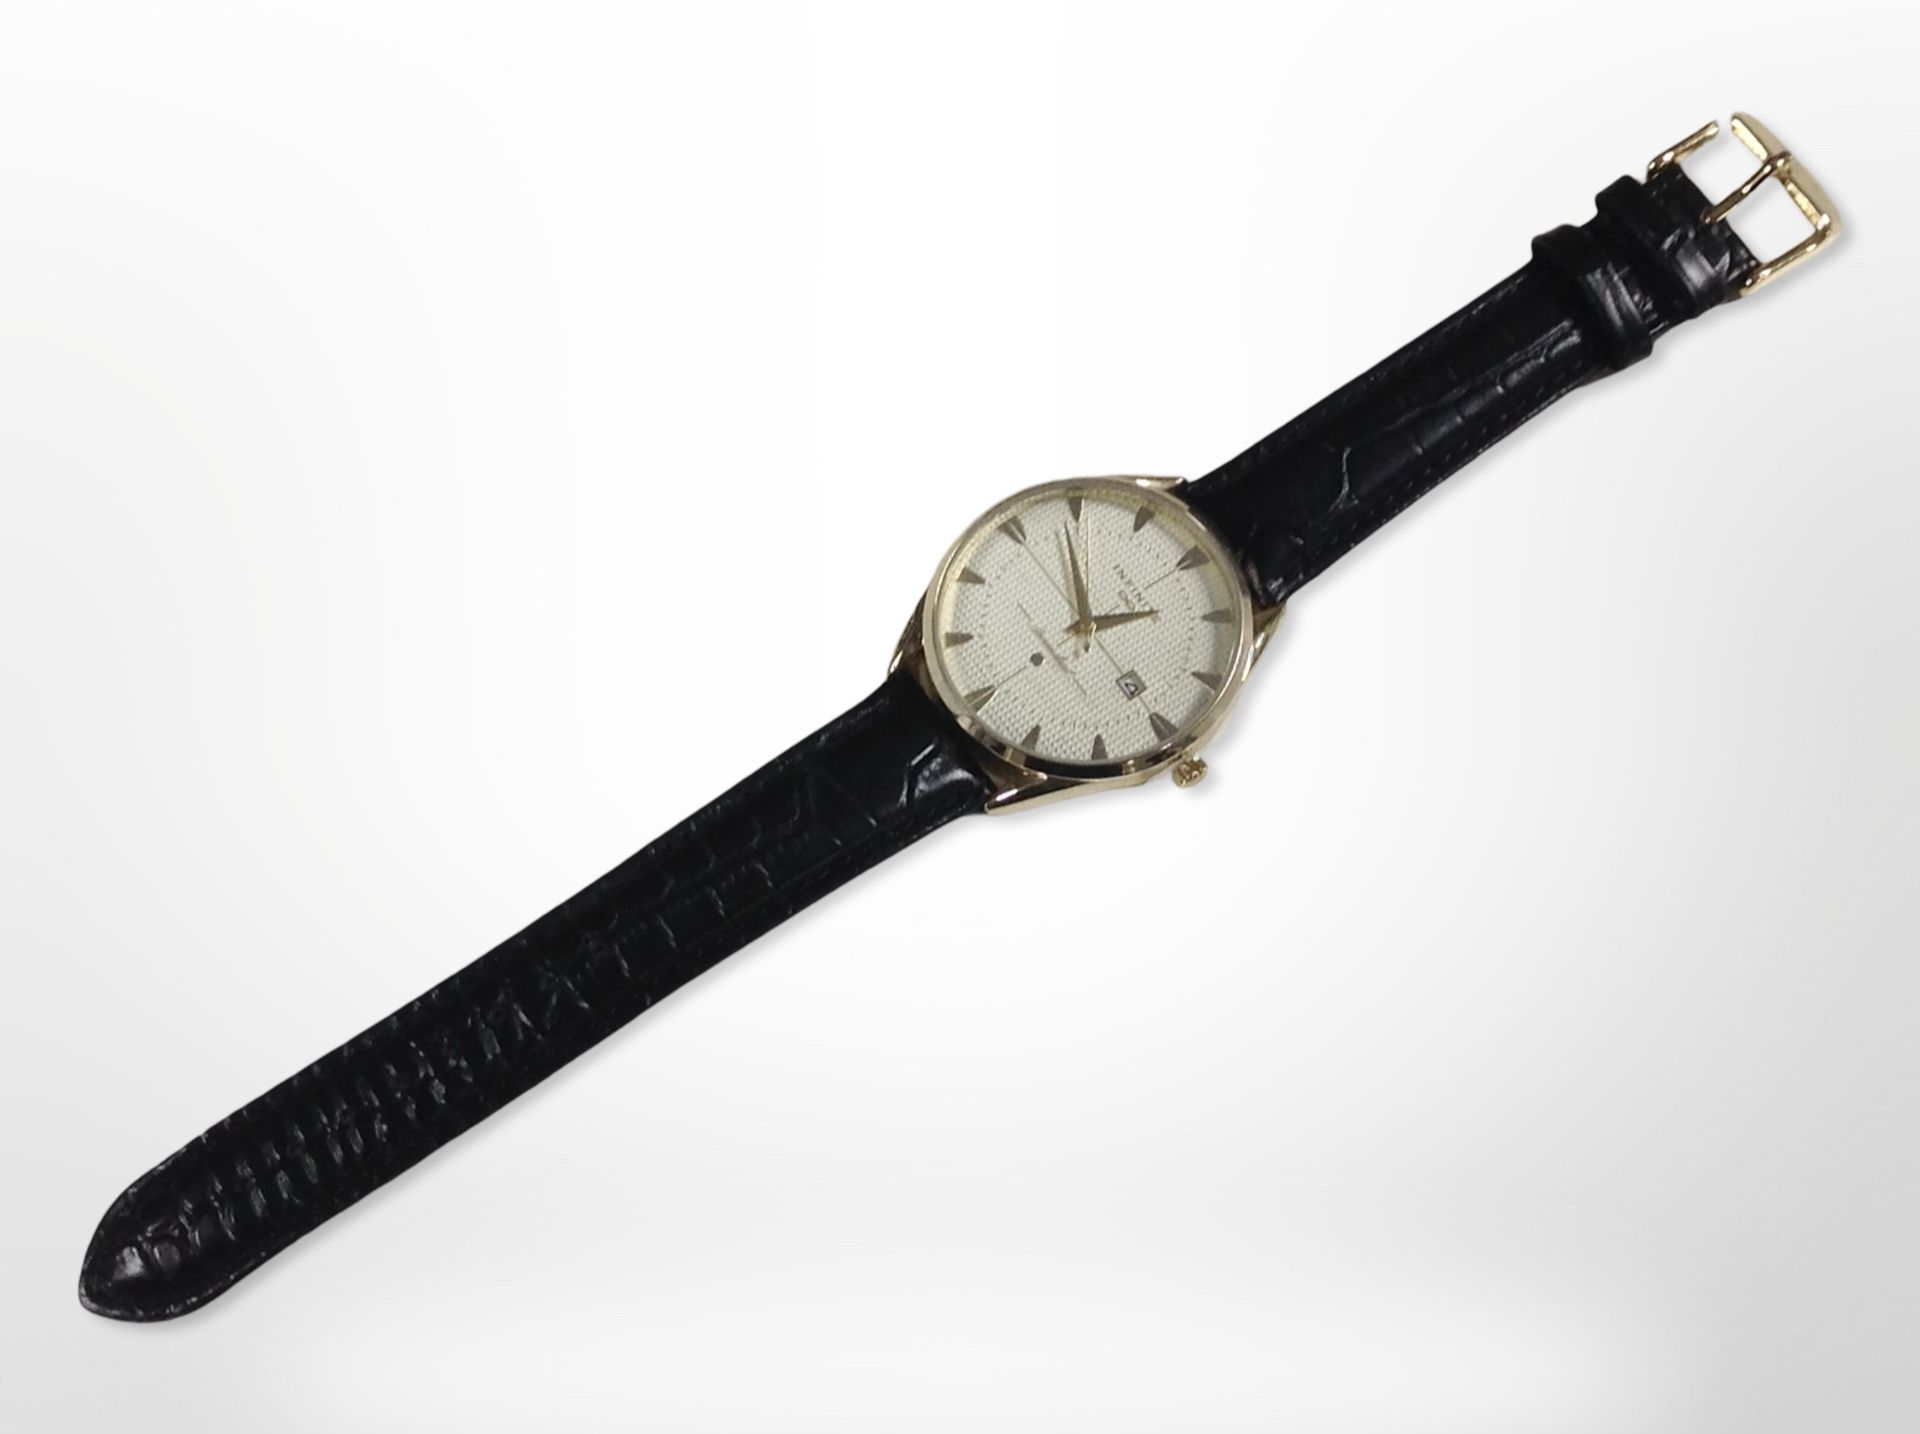 A gent's Ben Sherman wristwatch and a further Infinite wristwatch, both cases 38mm. - Image 2 of 2